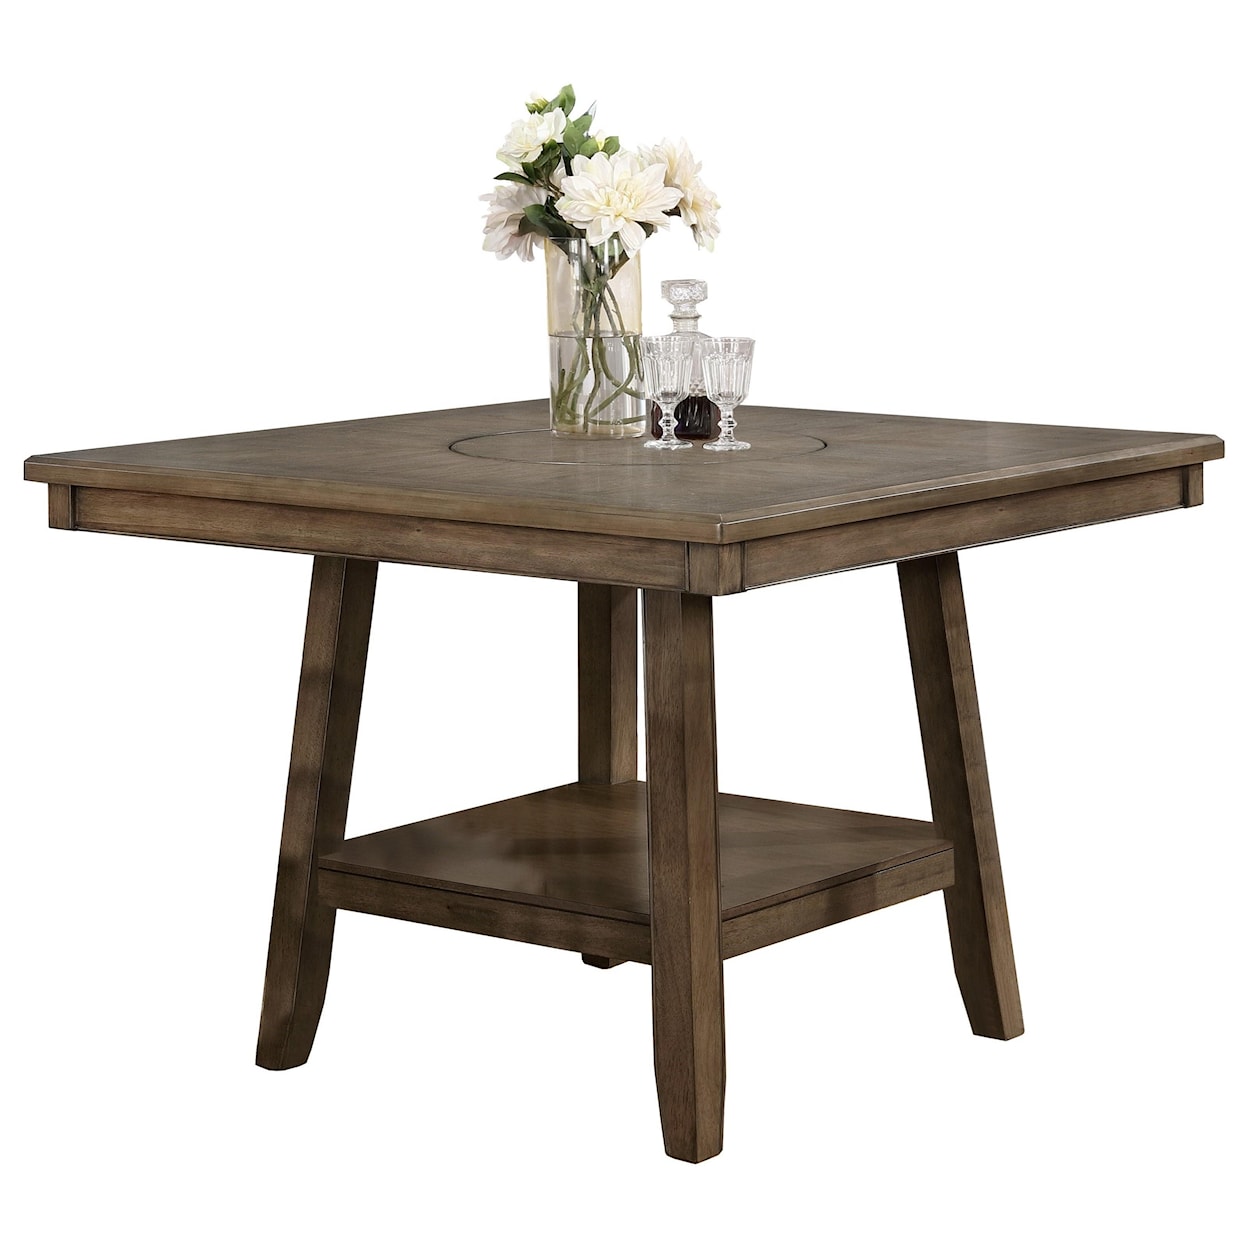 Crown Mark Manning Counter Height Table with Lazy Susan